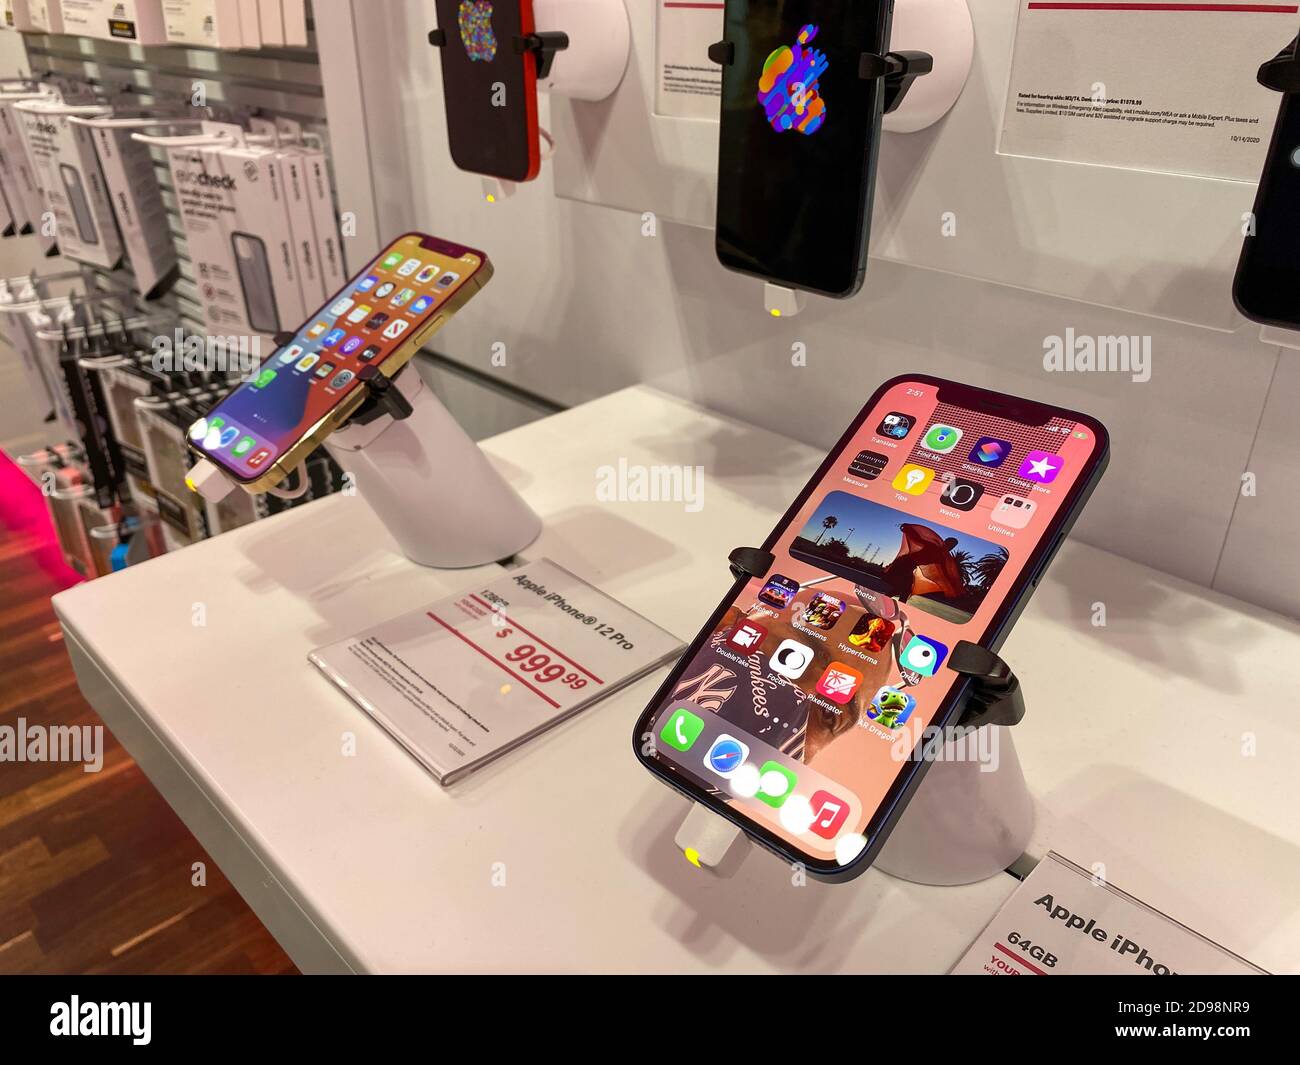 Orlando, FL/USA - 10/25/20: The new Apple iPhone 12 and 12 Pro on display at the T Mobile store. Stock Photo